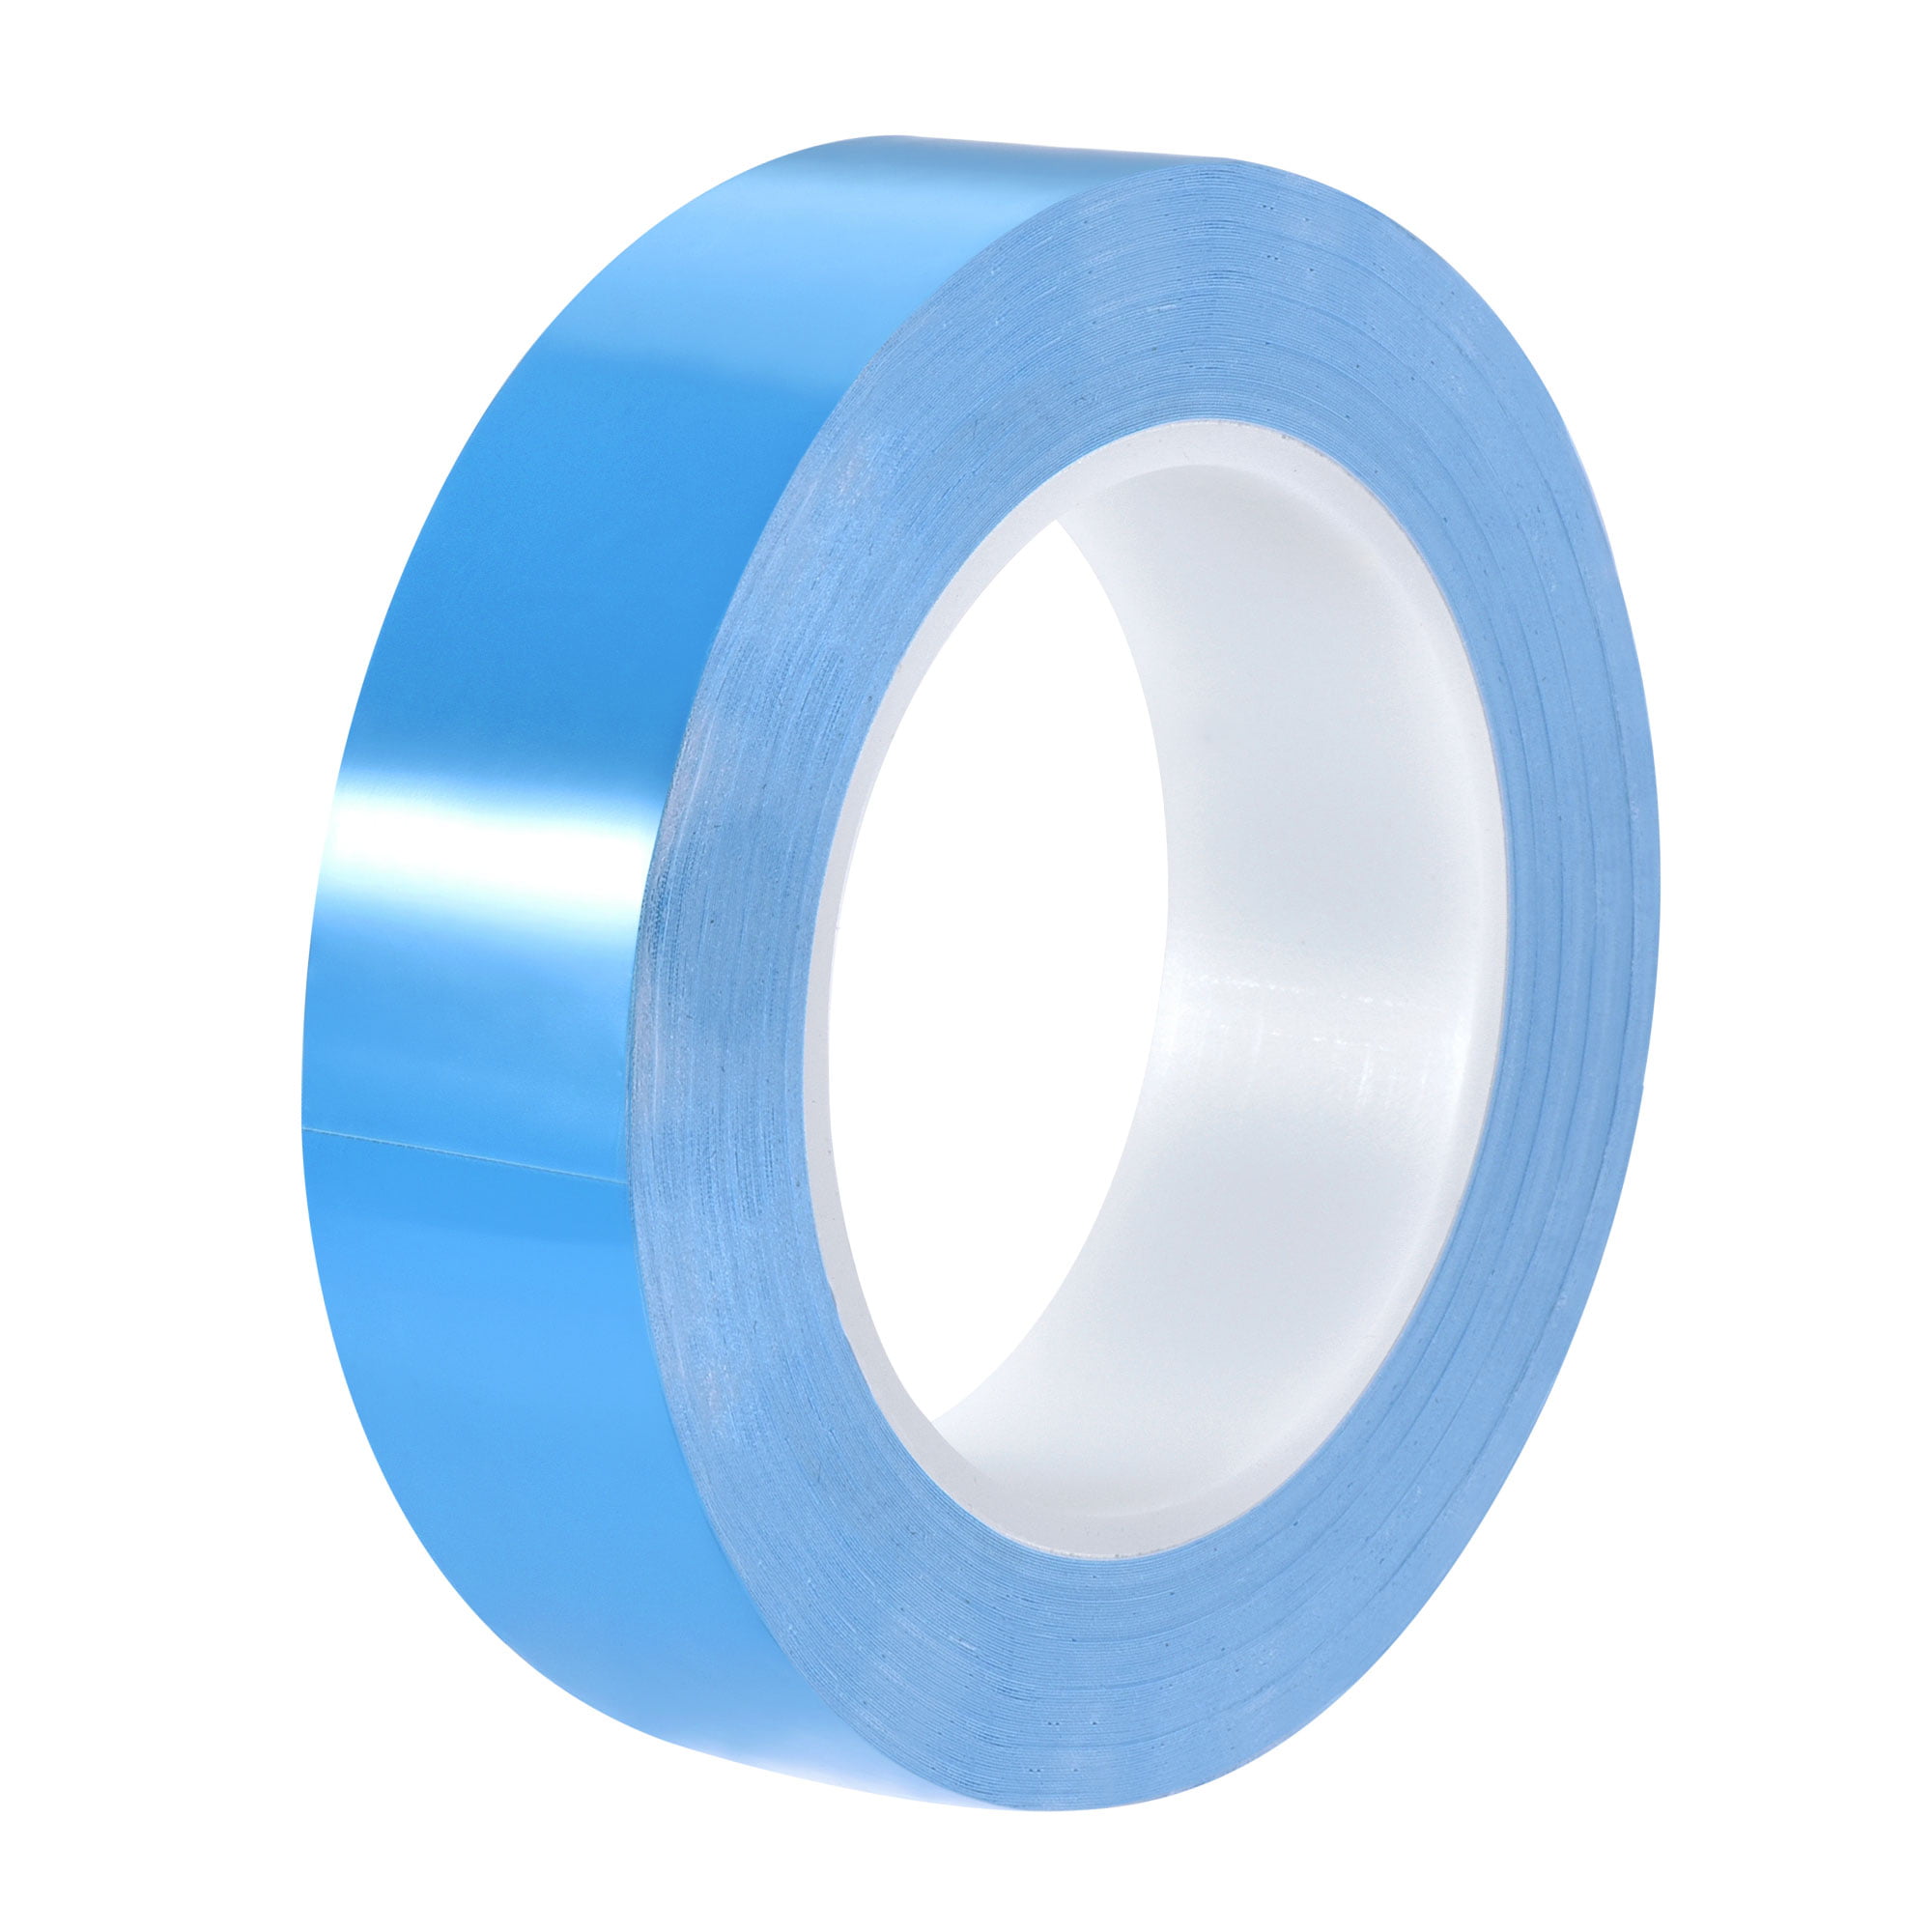 25M Double Side Thermal Conductive Tape Blue Heat Transfer Tape Width  5-30mm 